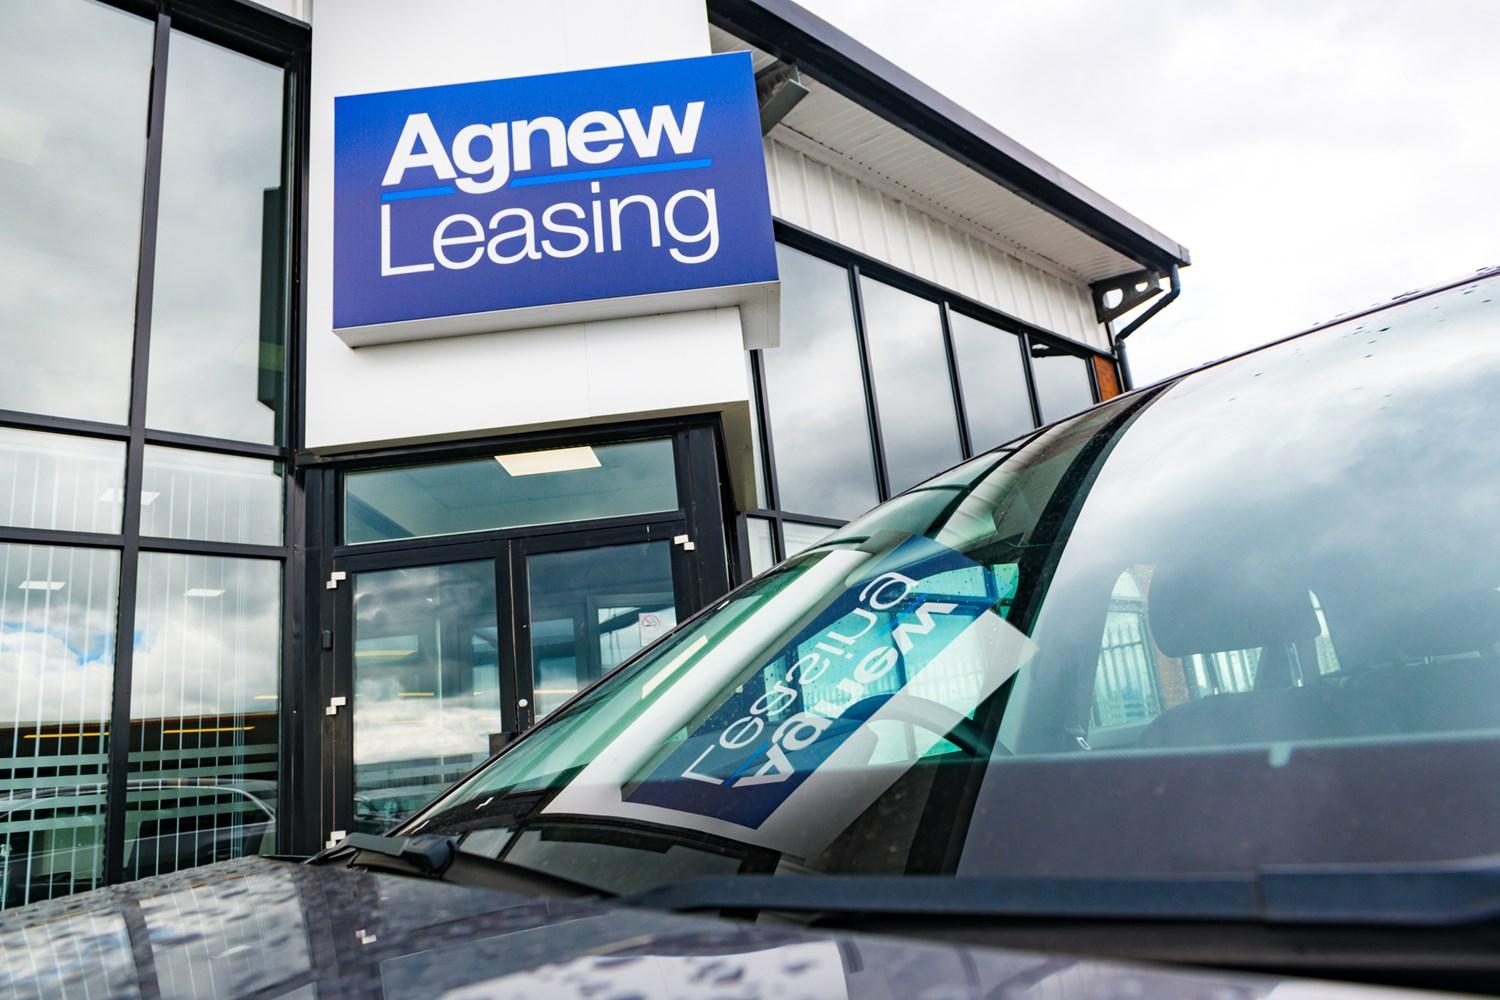 Agnew Leasing department building entrance in Belfast